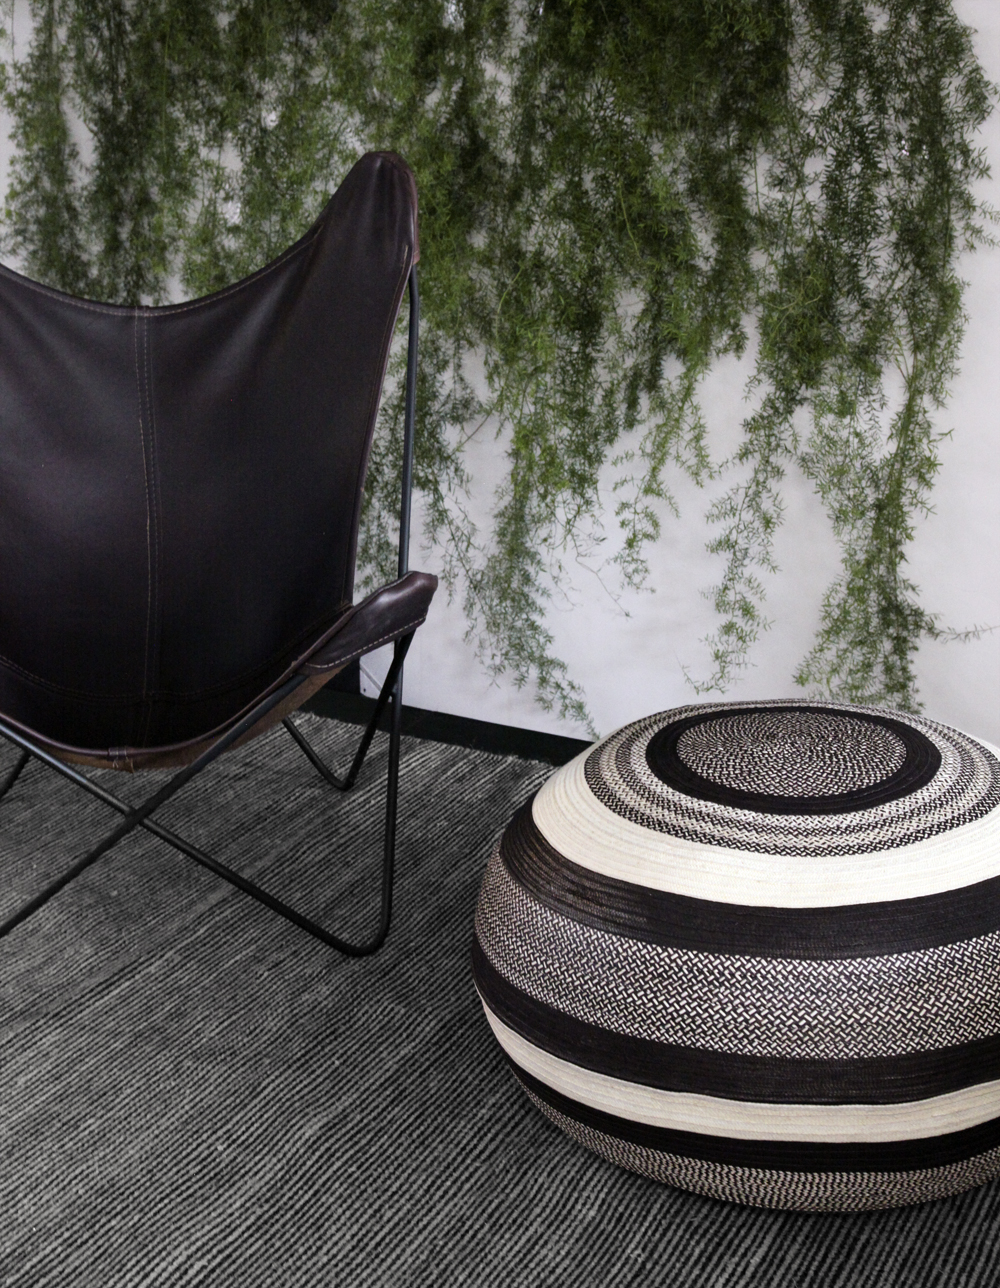 handmade black and white poufs from colombia, round ottomans